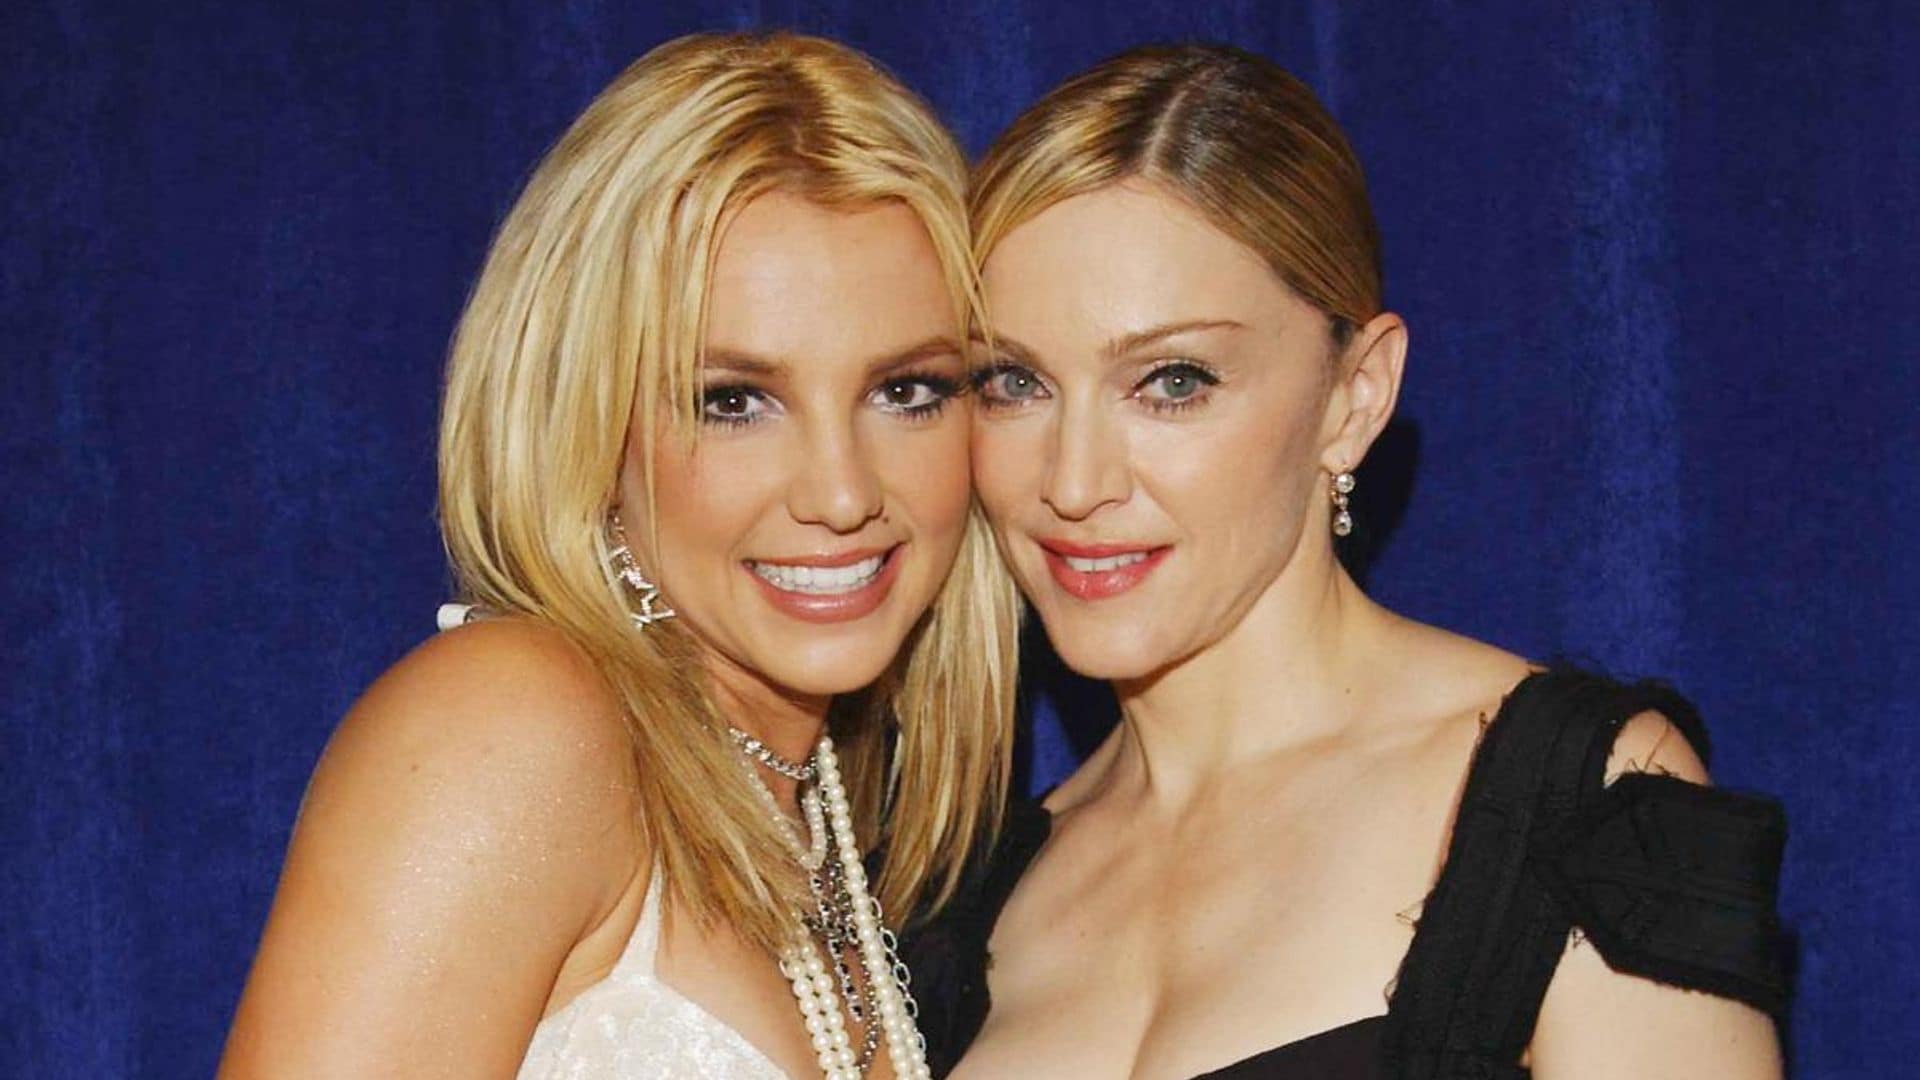 Is Britney Spears joining Madonna on tour?